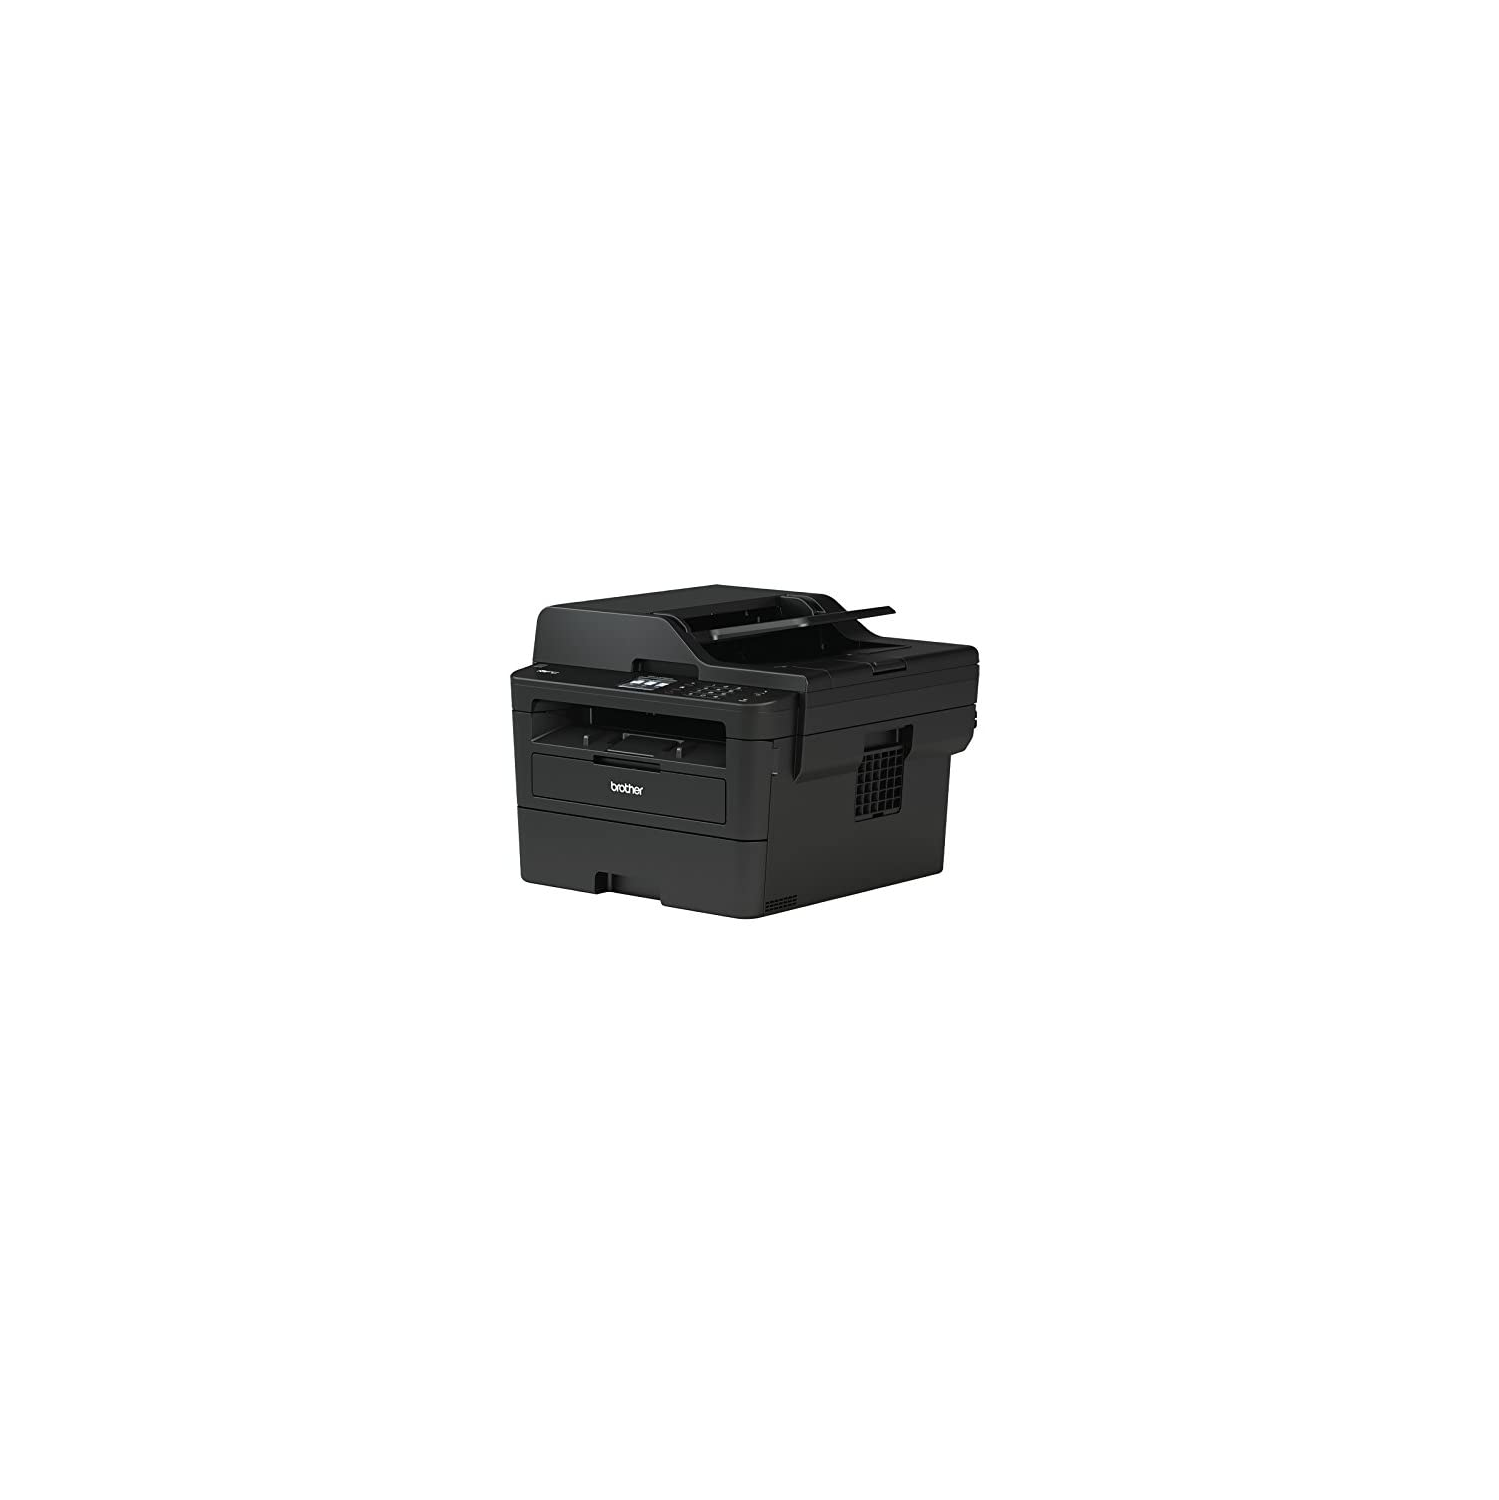 Brother MFCL2730DW Wireless Monochrome Printer with Scanner, Copier & Fax, Black, Easily send print jobs wirelessly from your desktop, laptop, smartphone or tablet